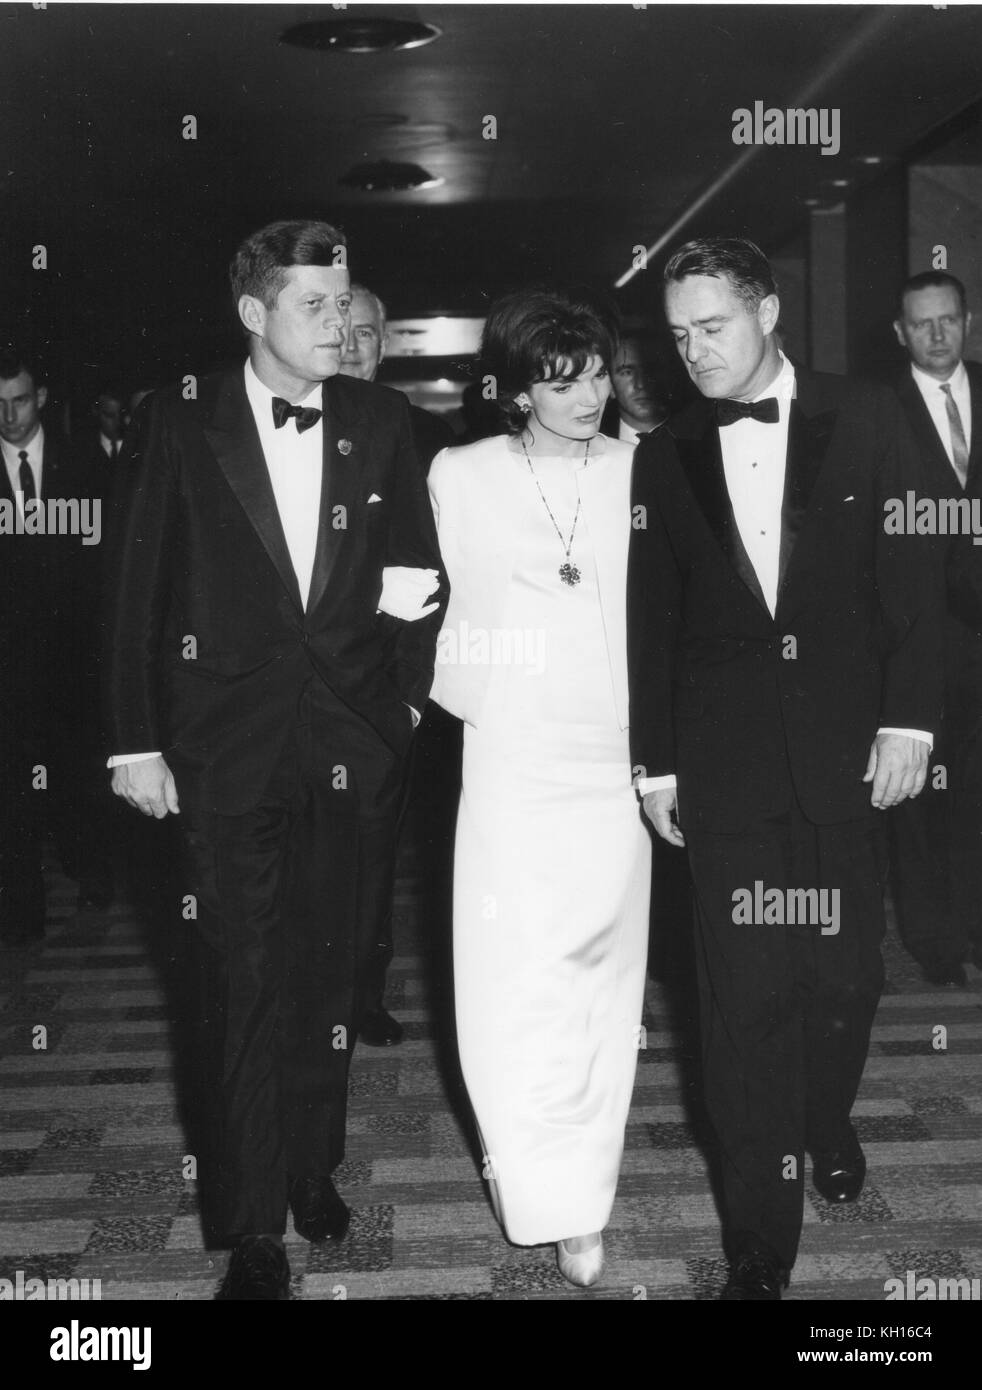 President John F Kennedy, Jacqueline Kennedy and brother-in-law Sargent Shriver in conversation at the First International Awards Dinner of the Joseph P Kennedy, Jr Foundation, Washington, DC, 12/06/1962. Photo by Abbie Rowe Stock Photo